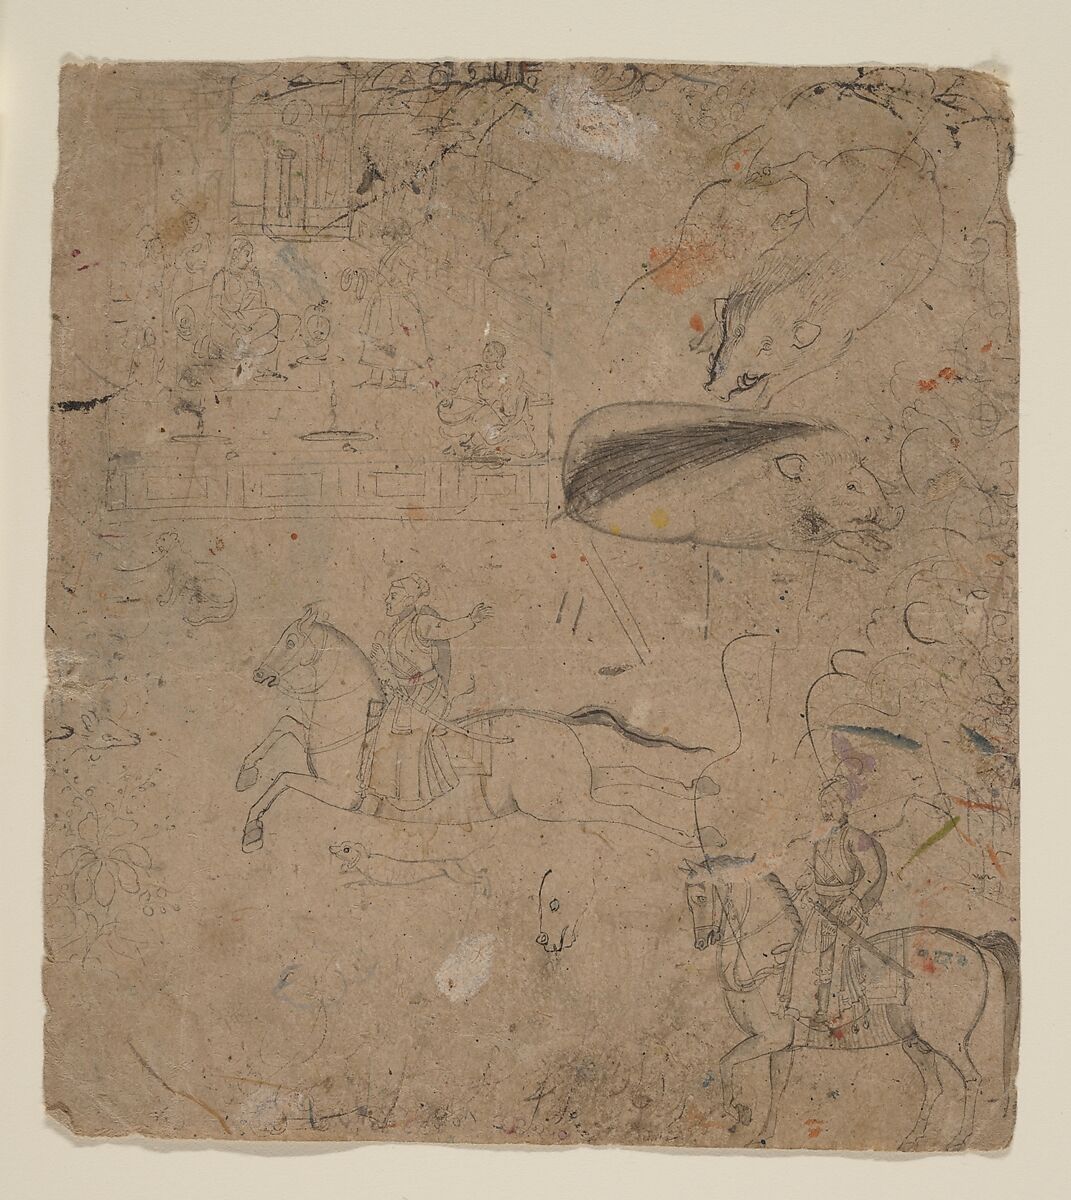 Page from a Sketchbook Showing Rulers on Horseback, Boars, and a Palace Scene, Attributed to Pandit Seu (Indian), Ink on paper, India (Pahari Hills, Guler) 